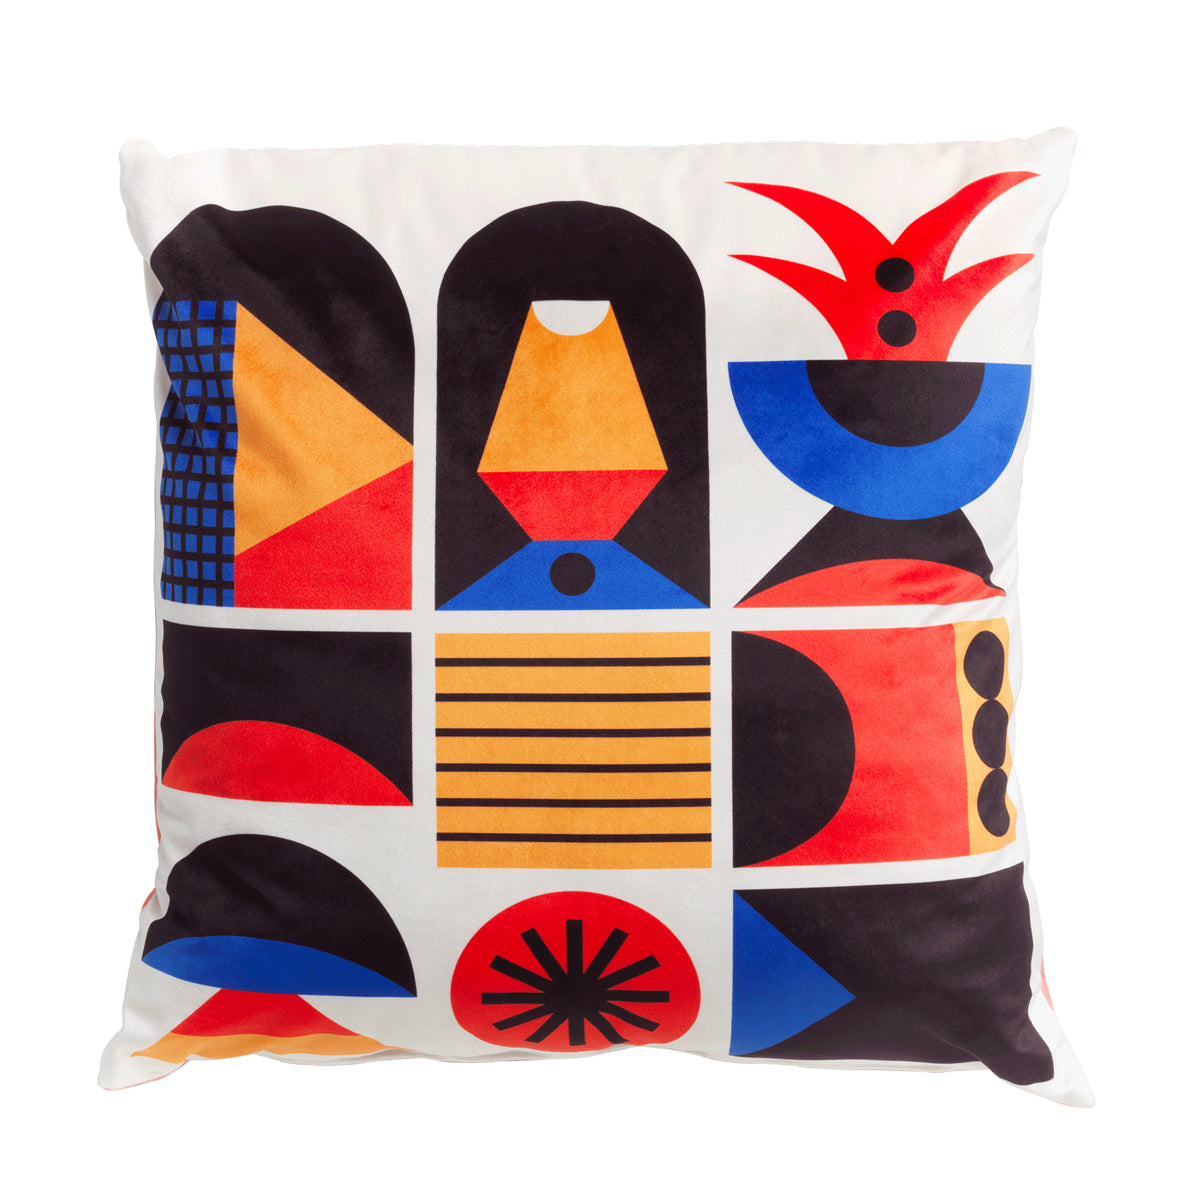 Oggian Face Cushion Cover by Marco Oggian - Qeeboo